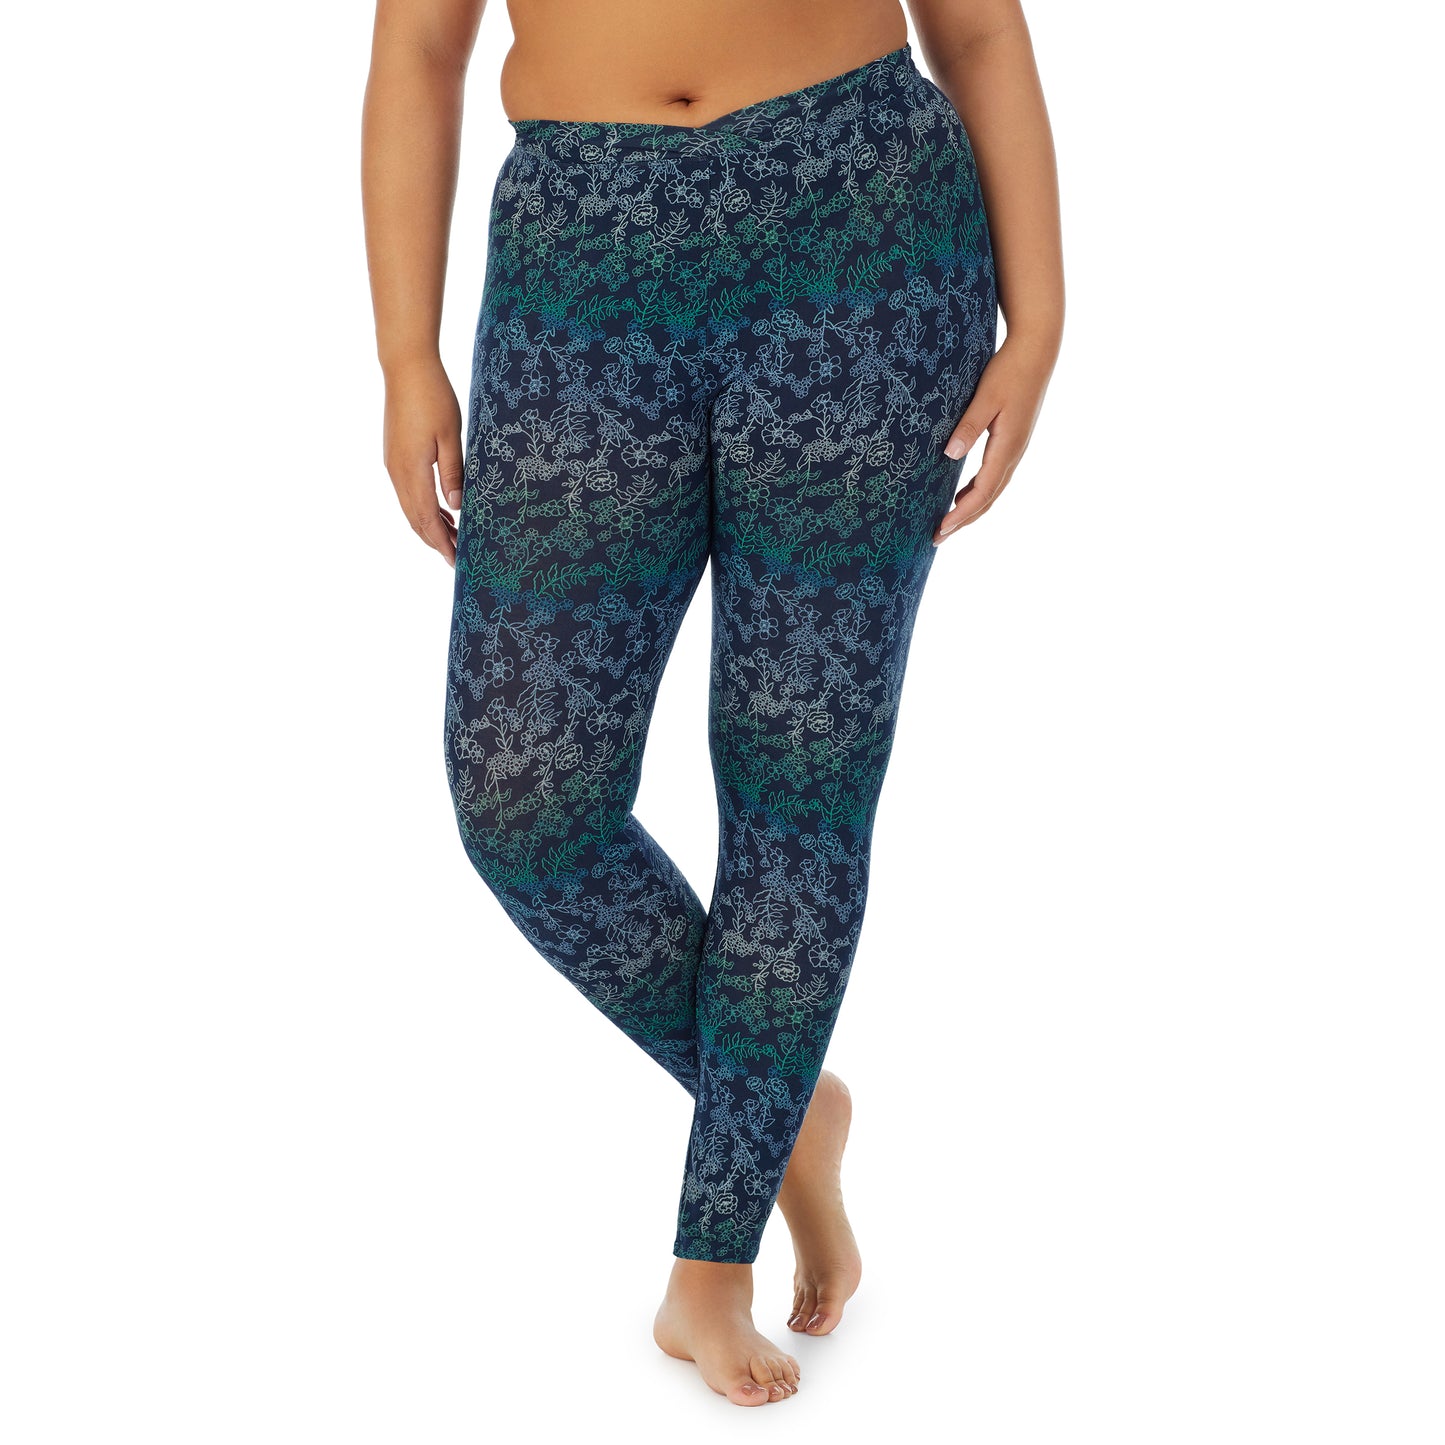 Blue Floral; Model is wearing size 1X. She is 5'11", Bust 36", Waist 36.5", Hips 47.5". @A lady wearing a Blue Floral stretch legging plus.